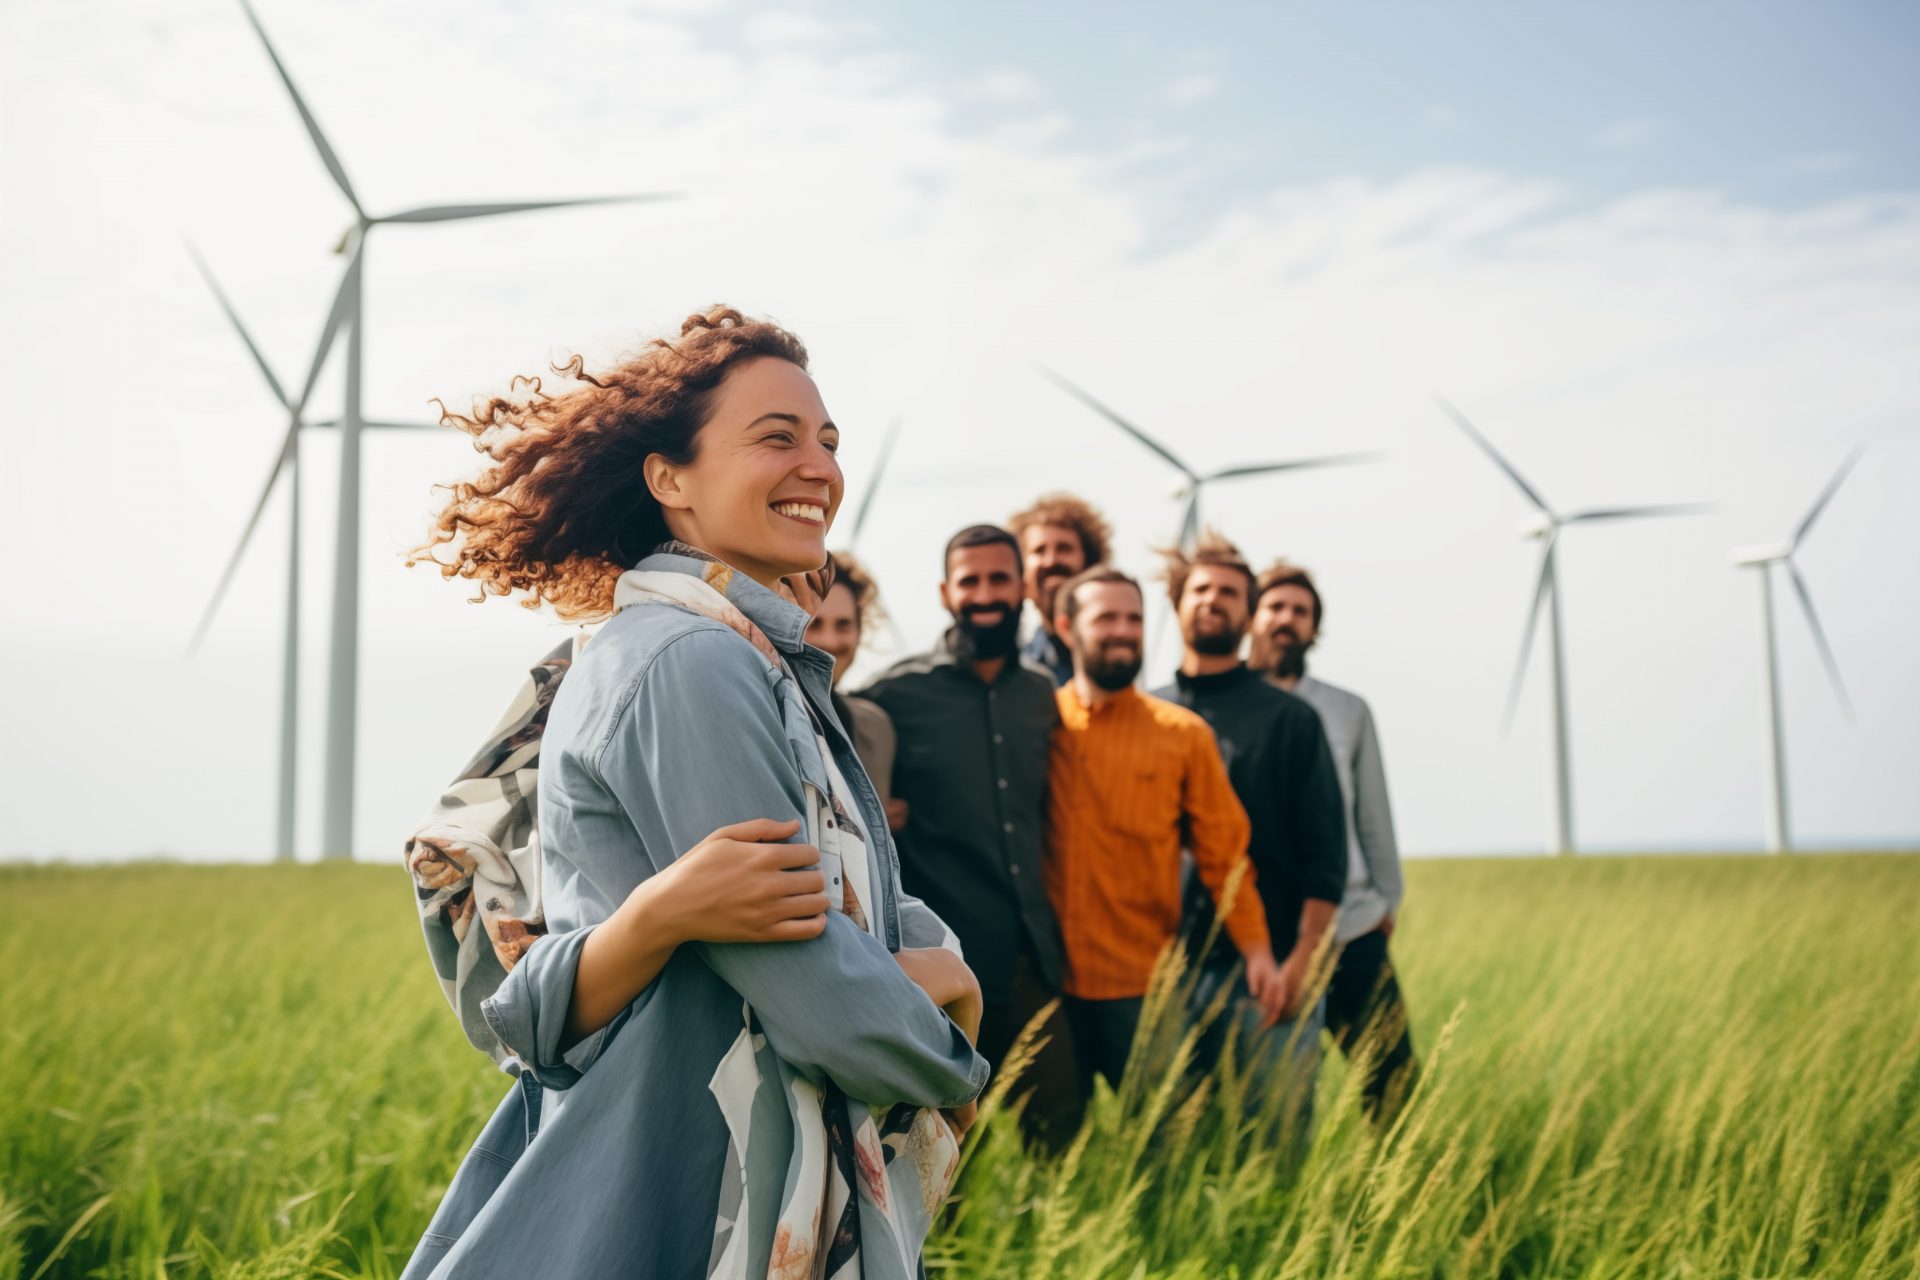 A group of smiling people stand on a green field, with wind turbines in the background.